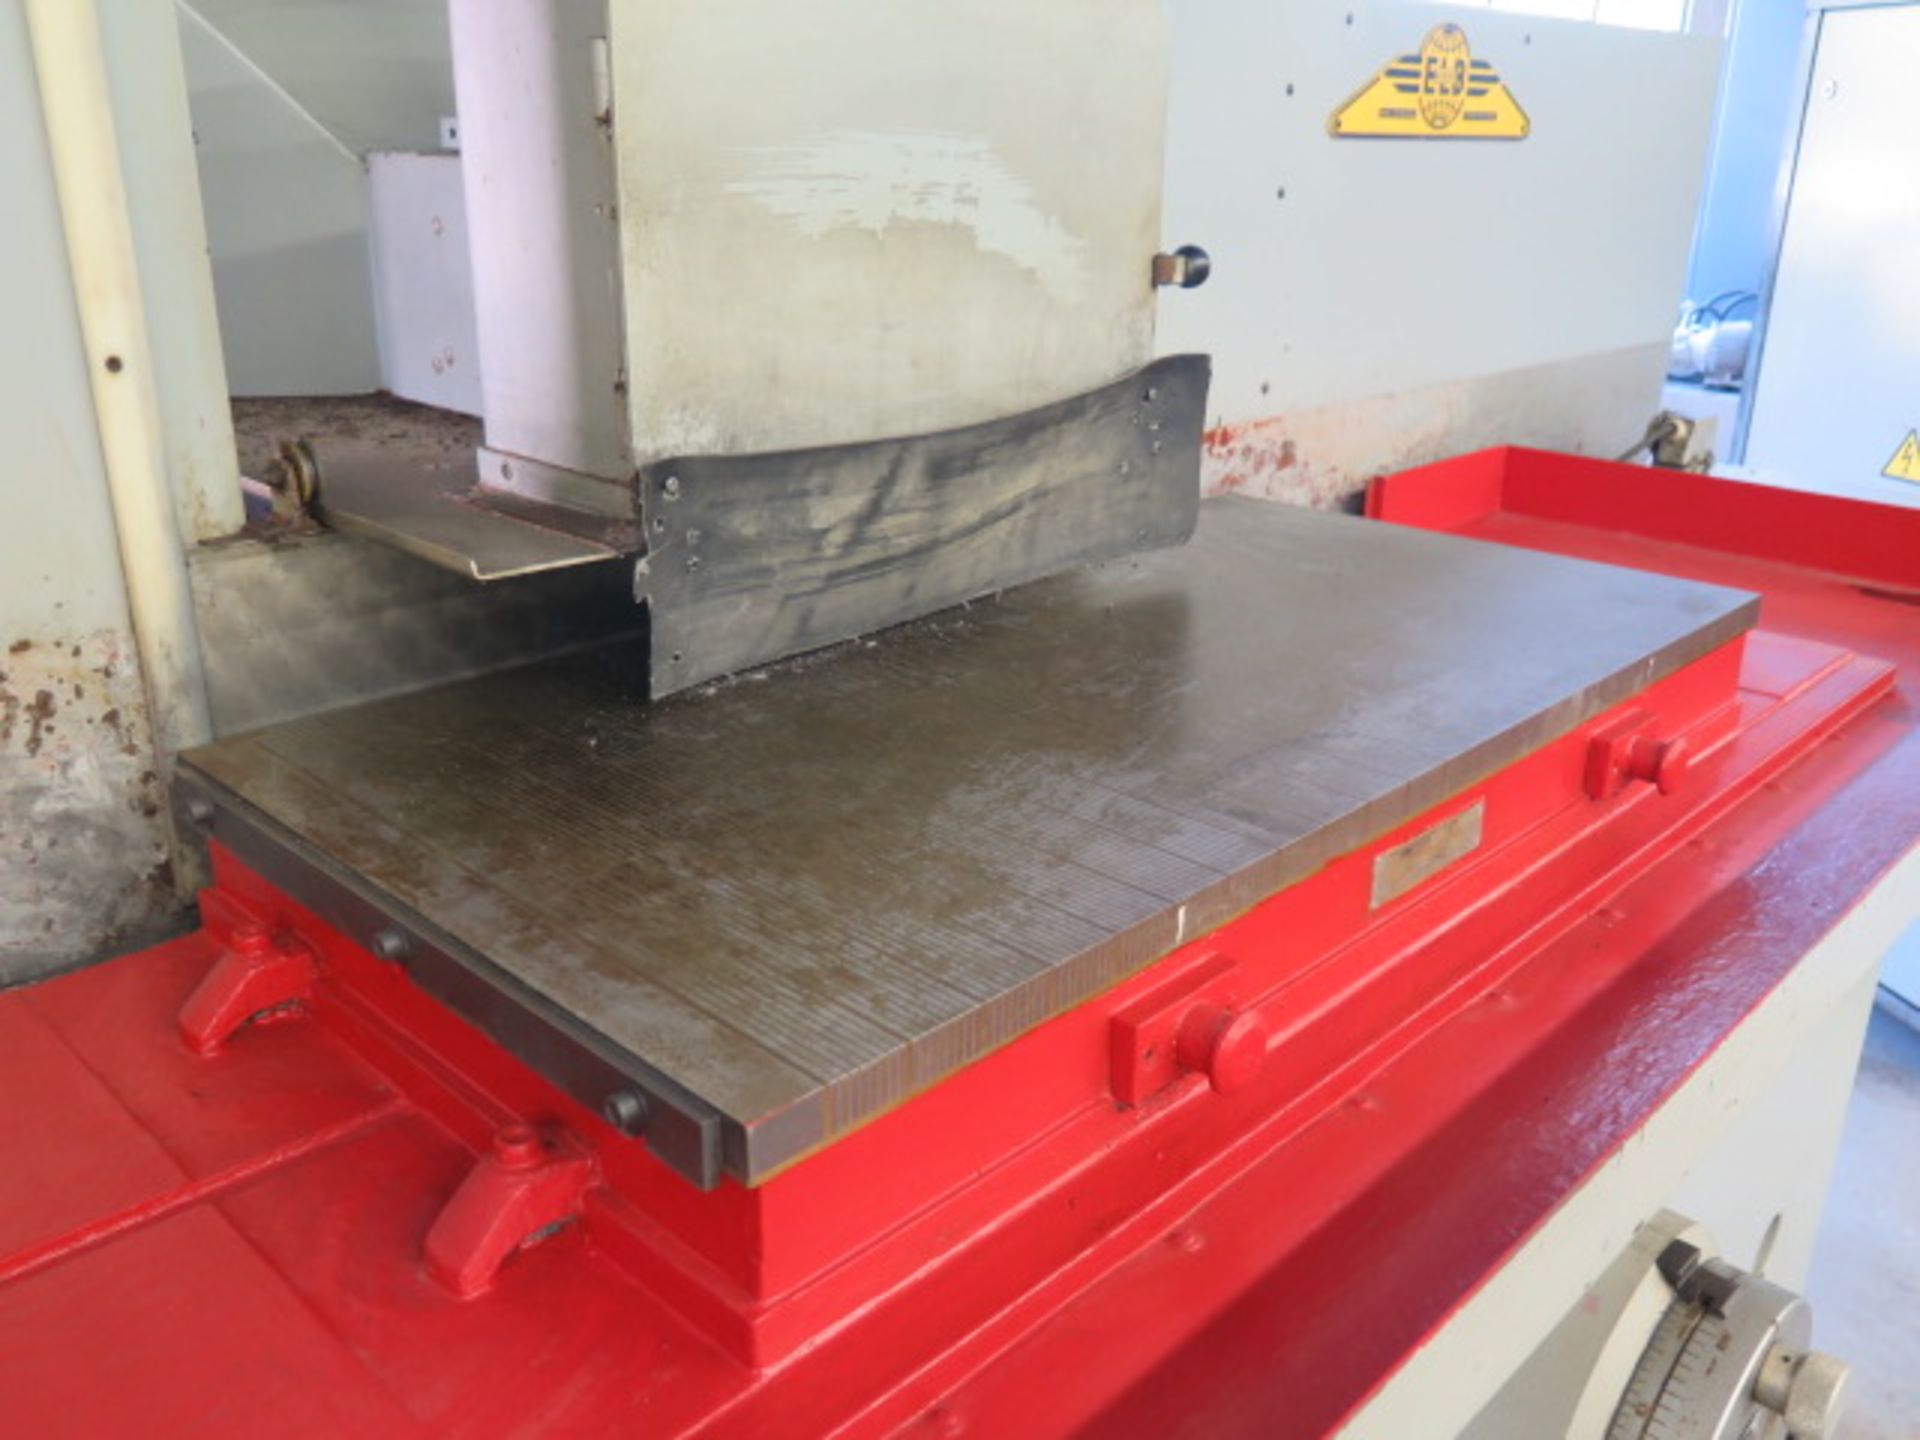 ELB type SWBE 010 NPC-K 20” x 40” Auto Surface Grinder s/n 209030 06 89 w/ ELB Controls, SOLD AS IS - Image 9 of 16